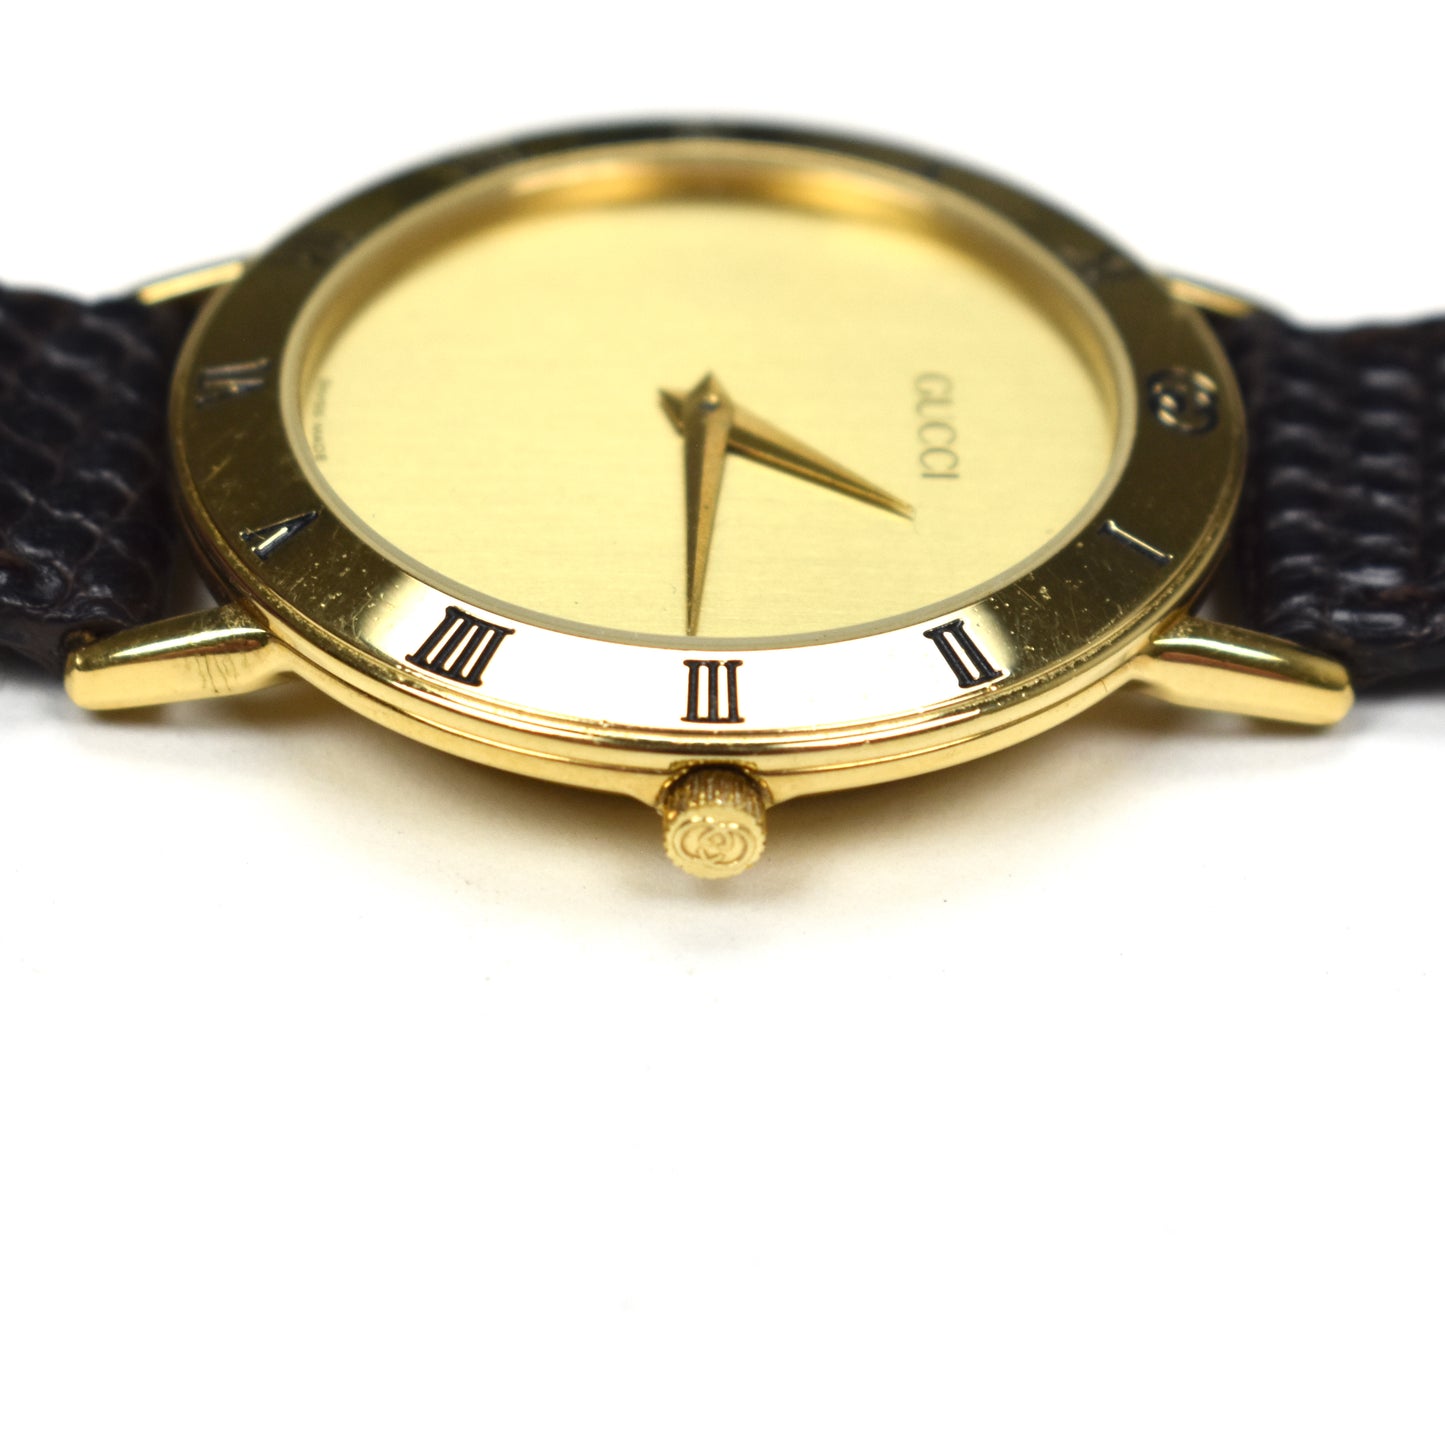 Gucci - 3000M Gold Dial Watch